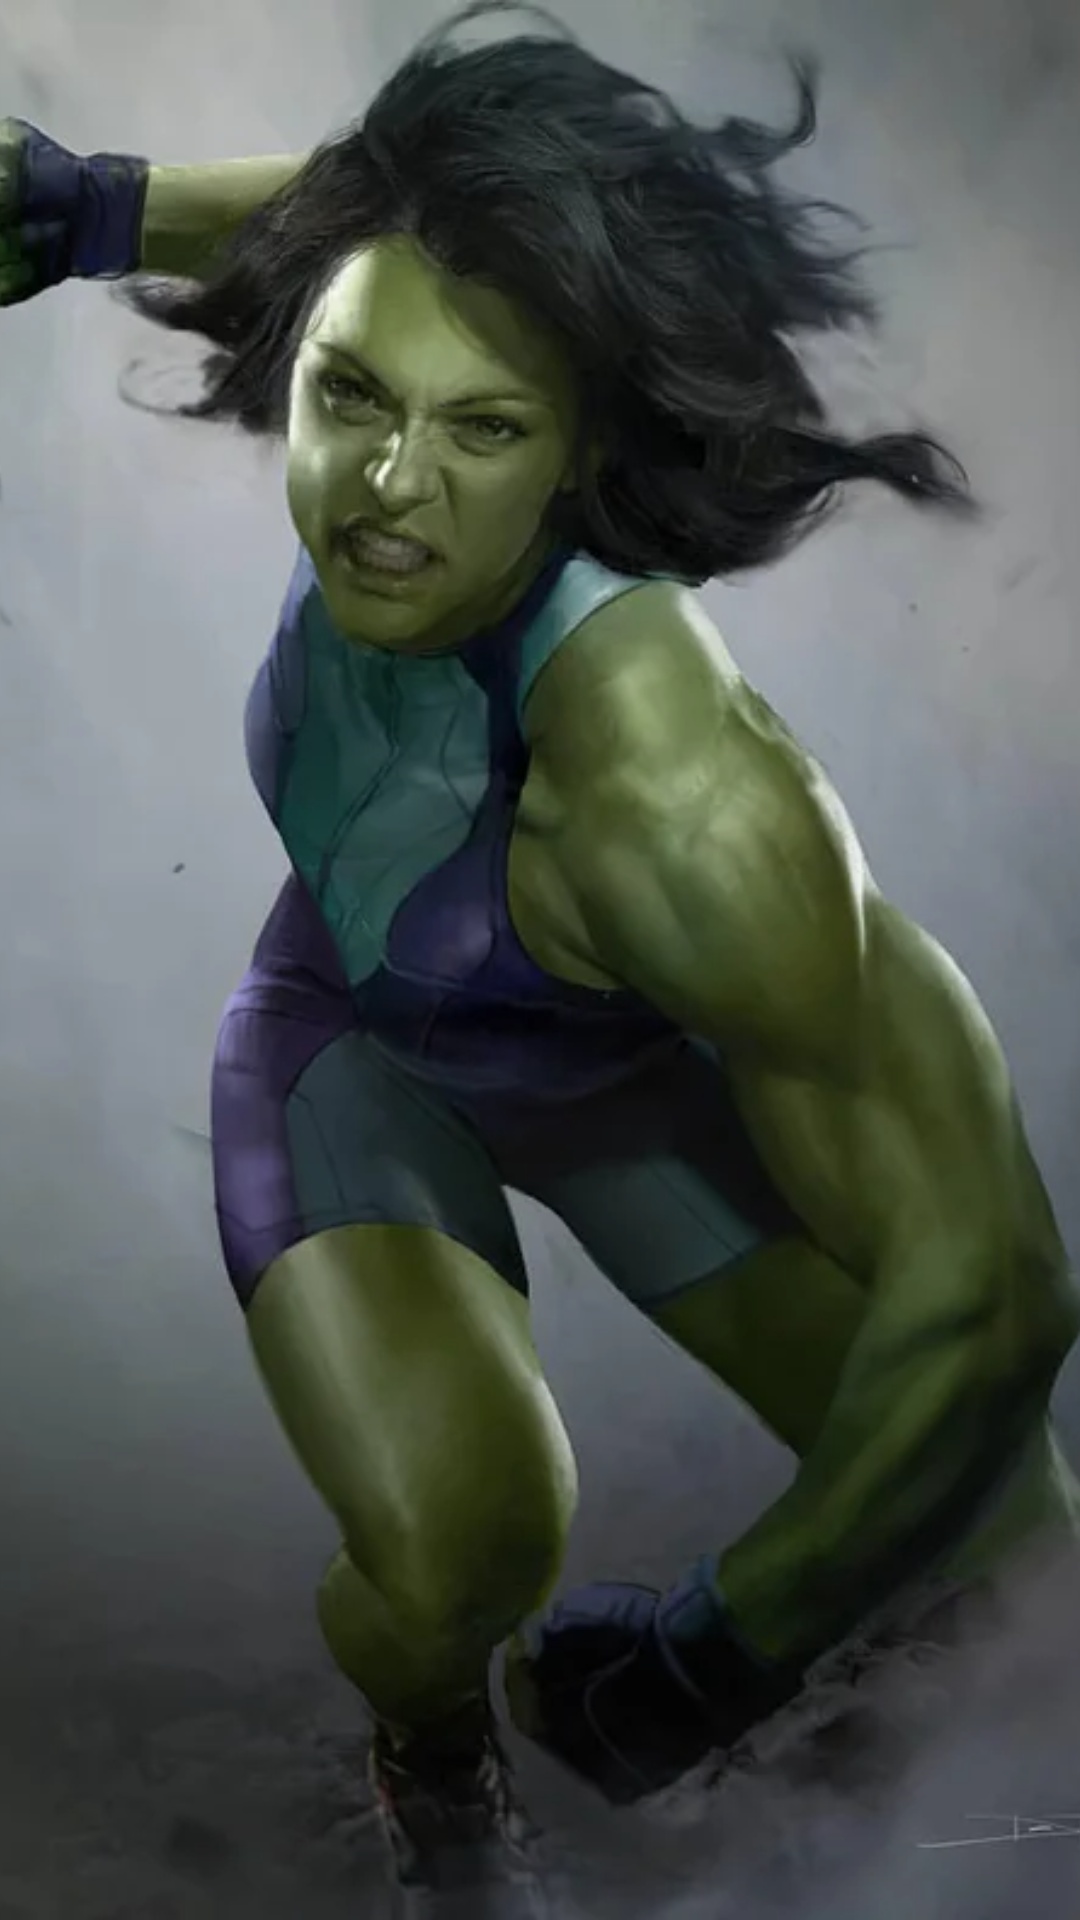 She Hulk Wallpapers - Top 15 Best She Hulk Movie Wallpapers [ HQ ]